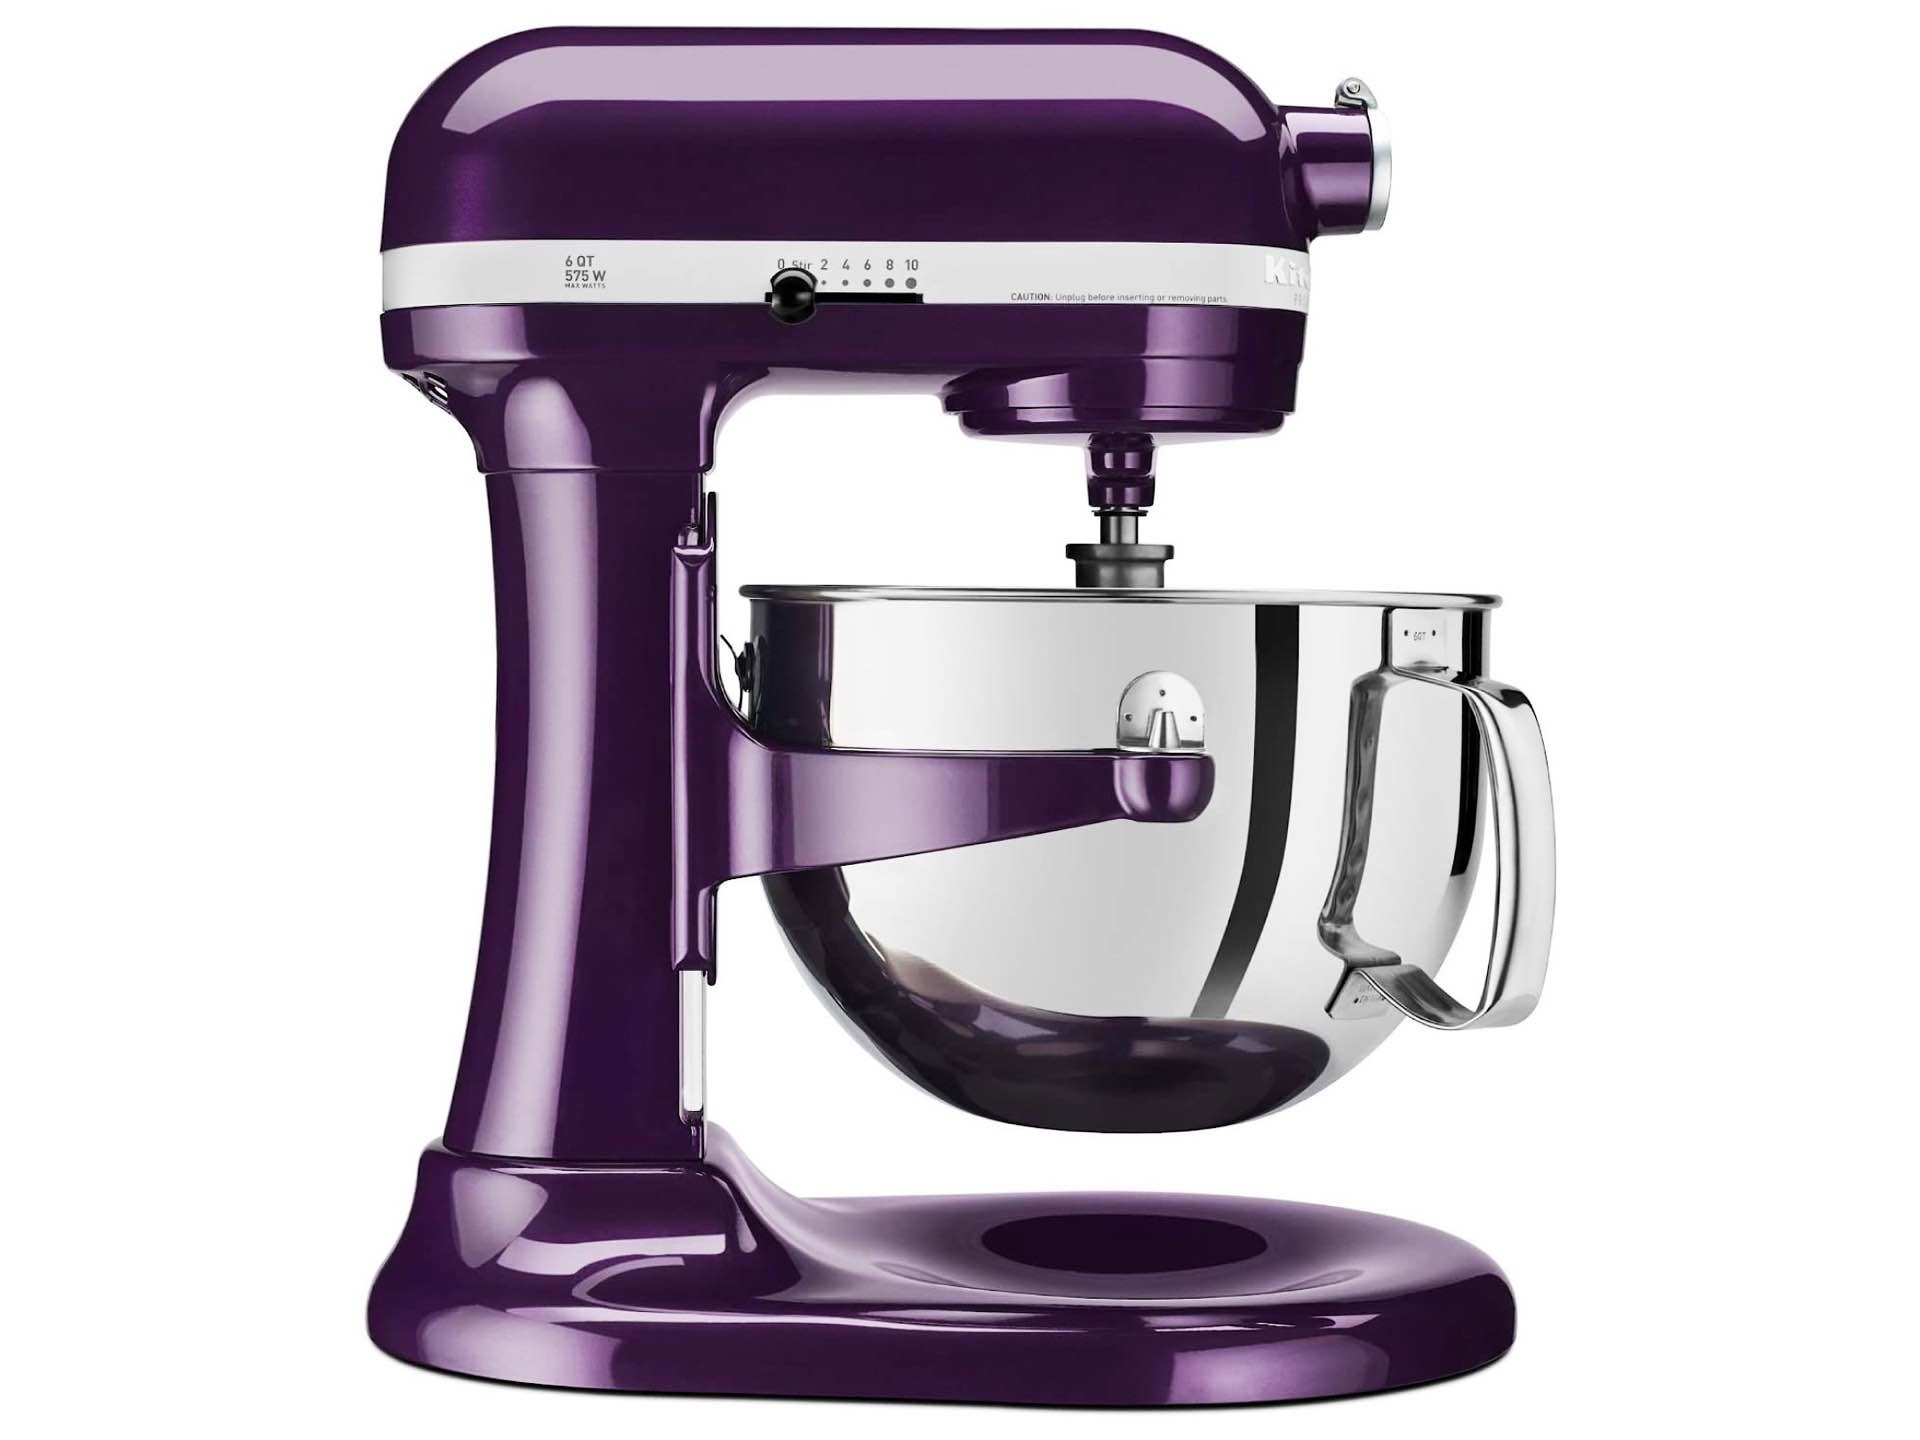 The KitchenAid 600 Series stand mixer. ($500–$900, depending on color)